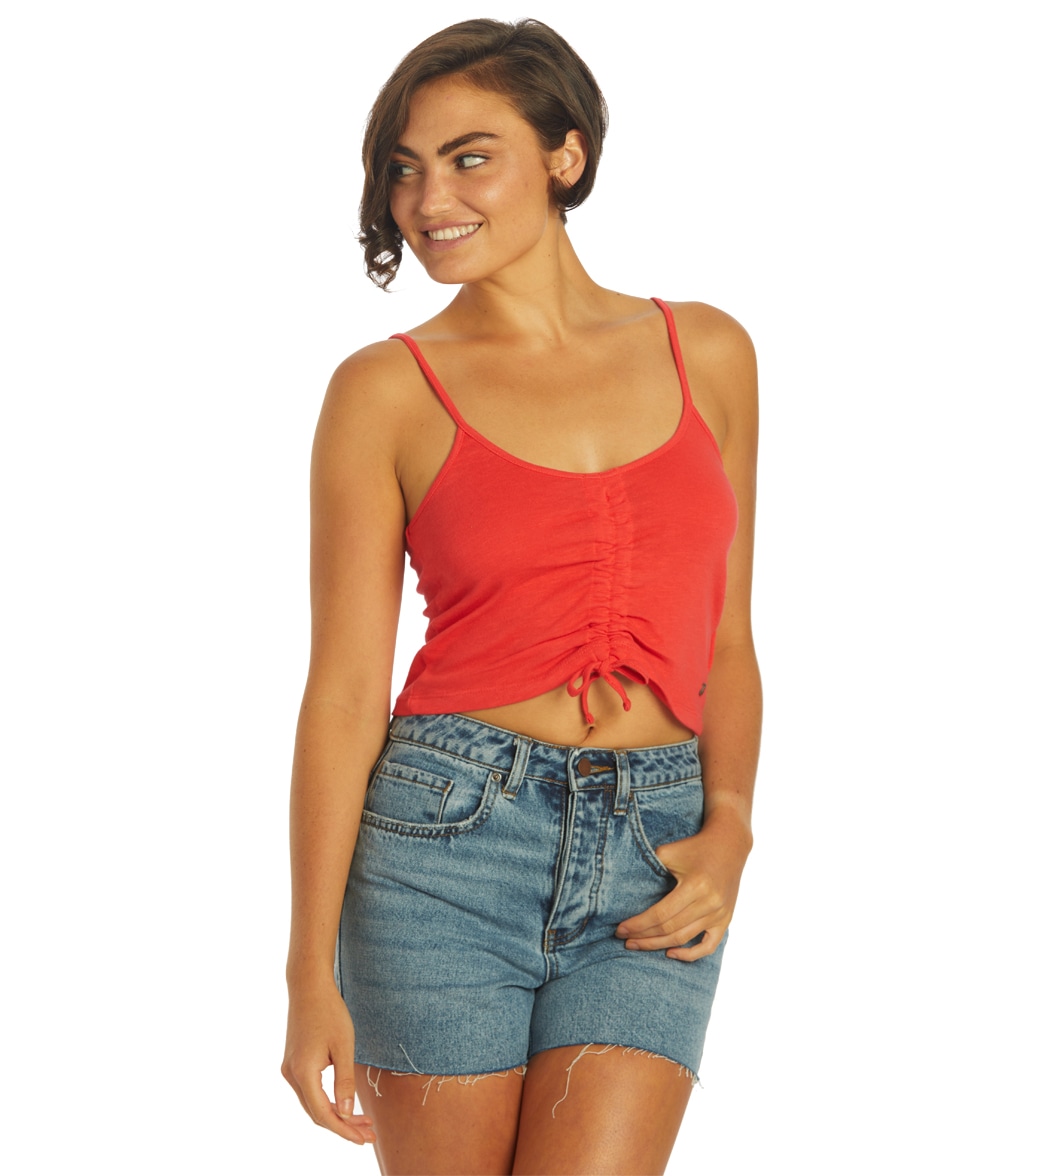 Roxy Women's Flirty Feels Tank Top - Hibiscus Large Cotton/Polyester - Swimoutlet.com